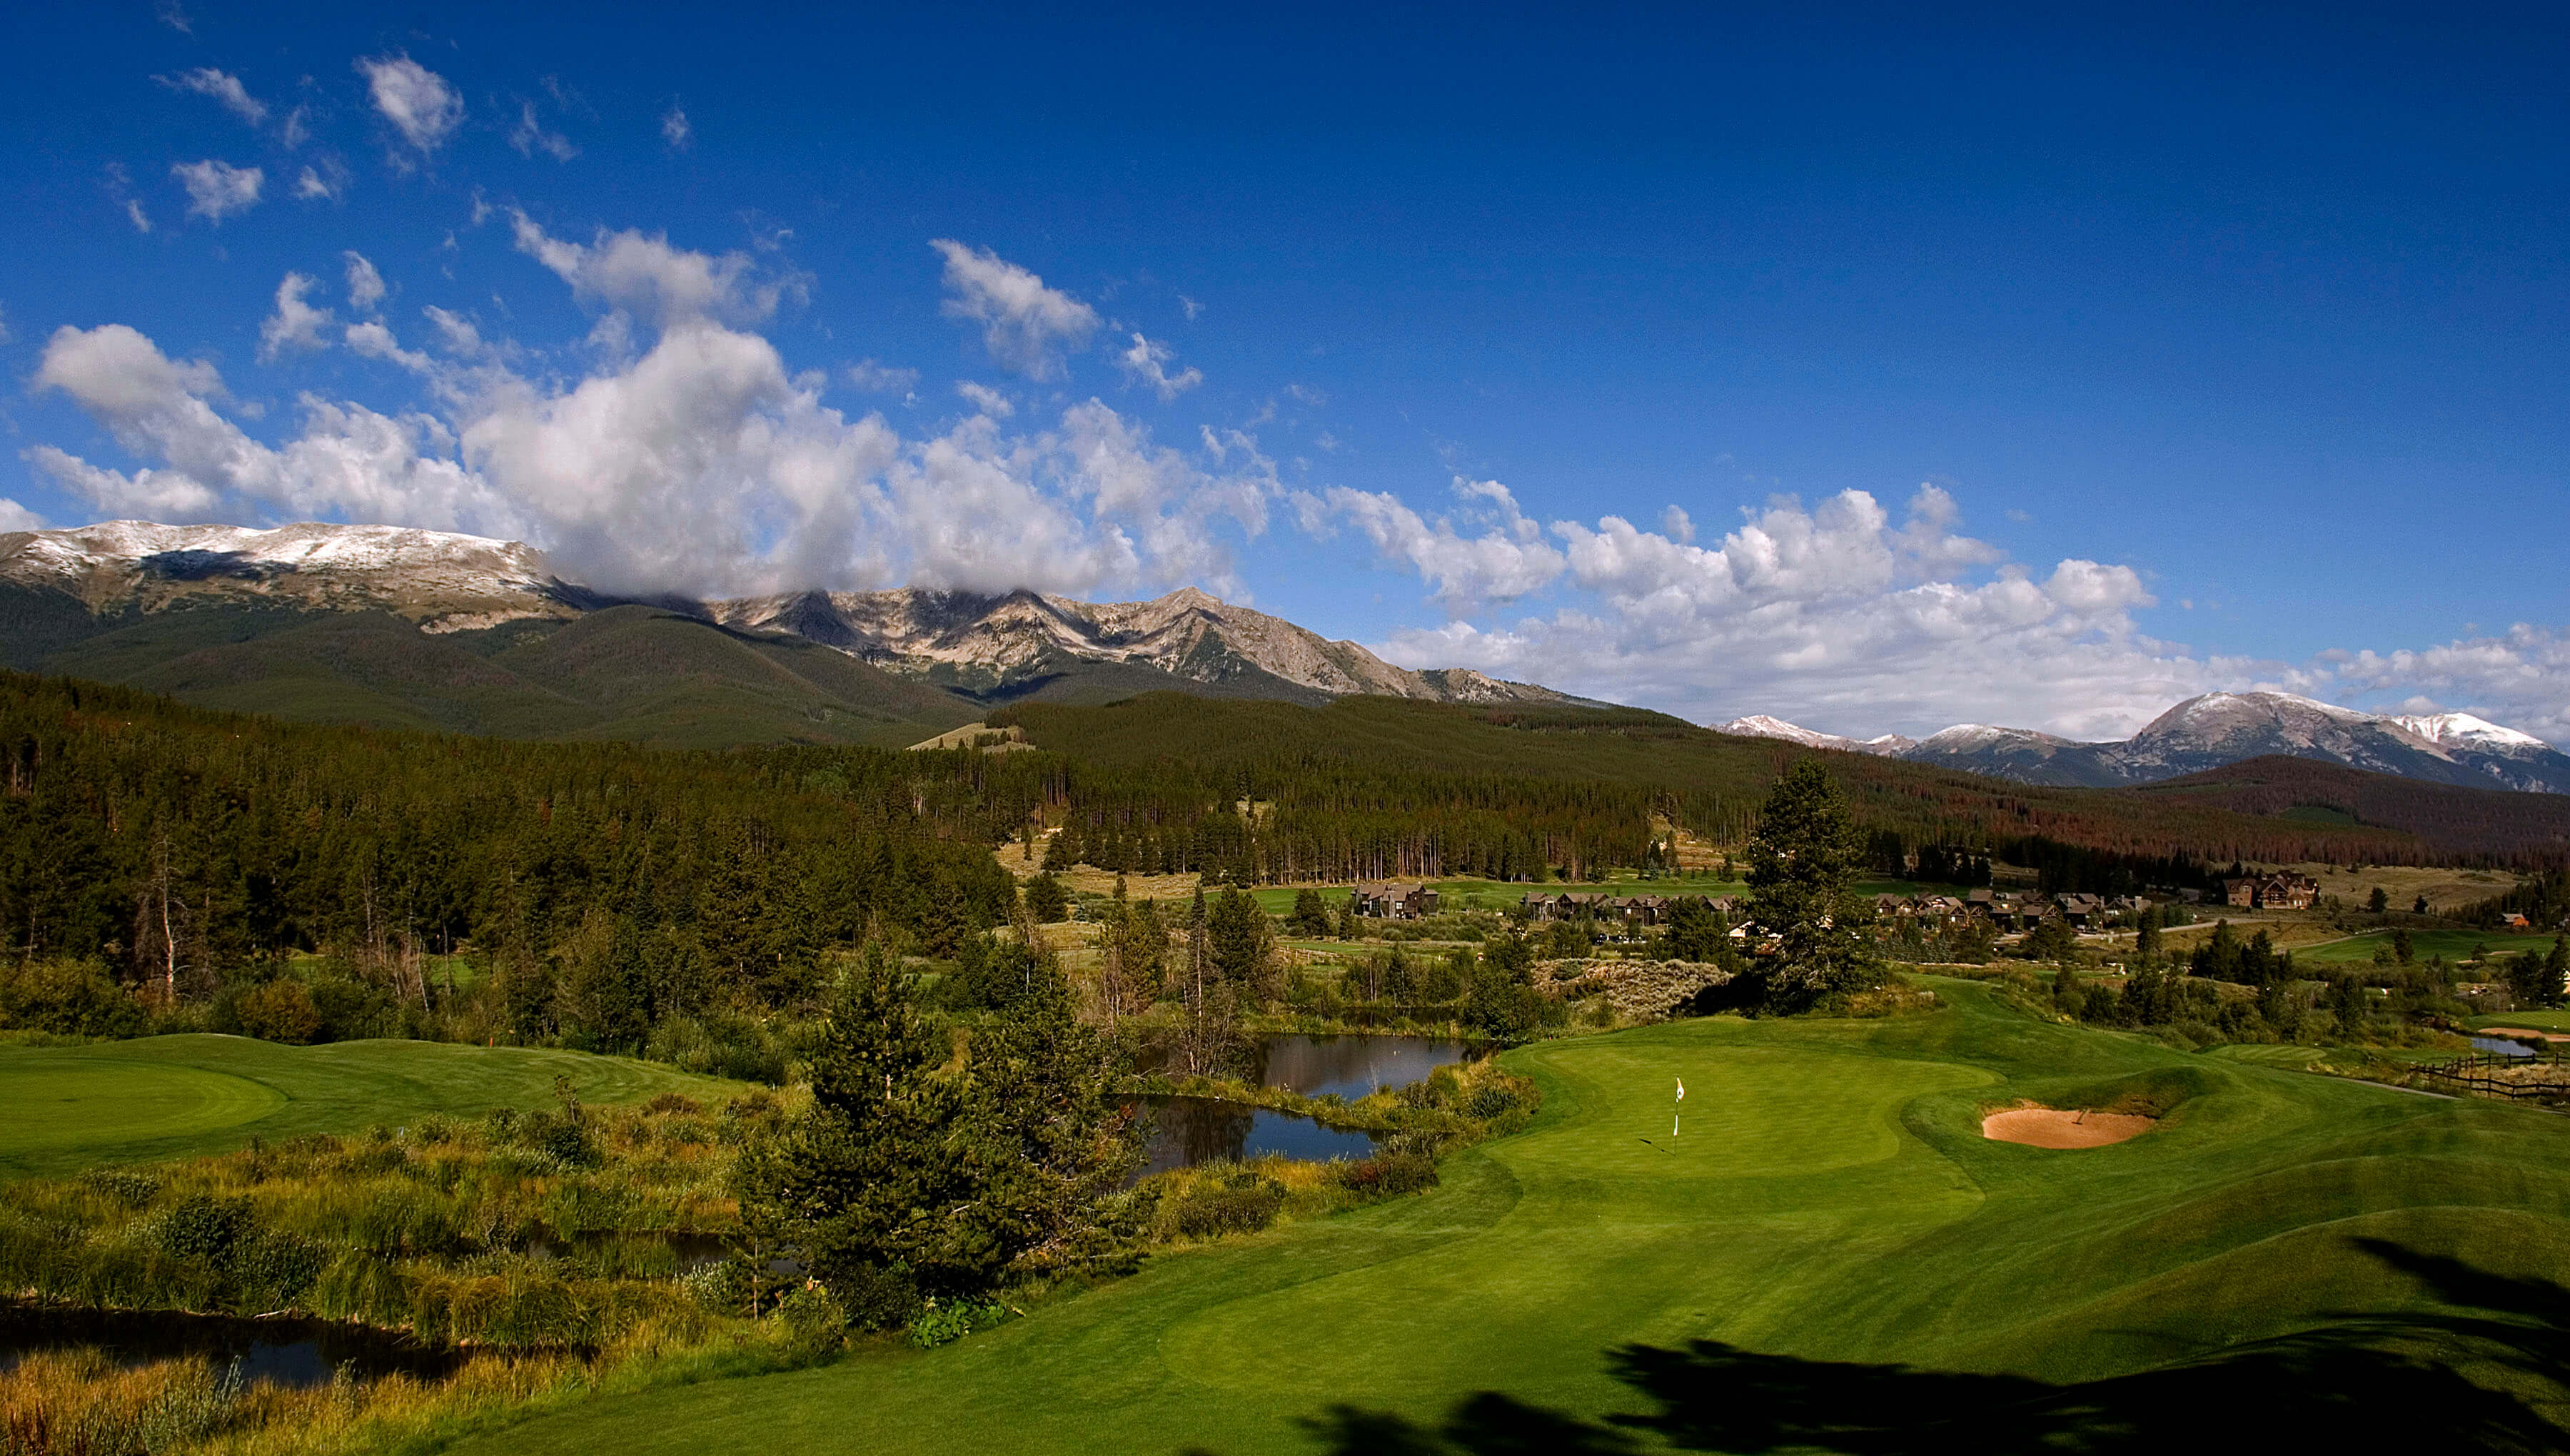 Overview of Breckenridge Nine at the Golf Course